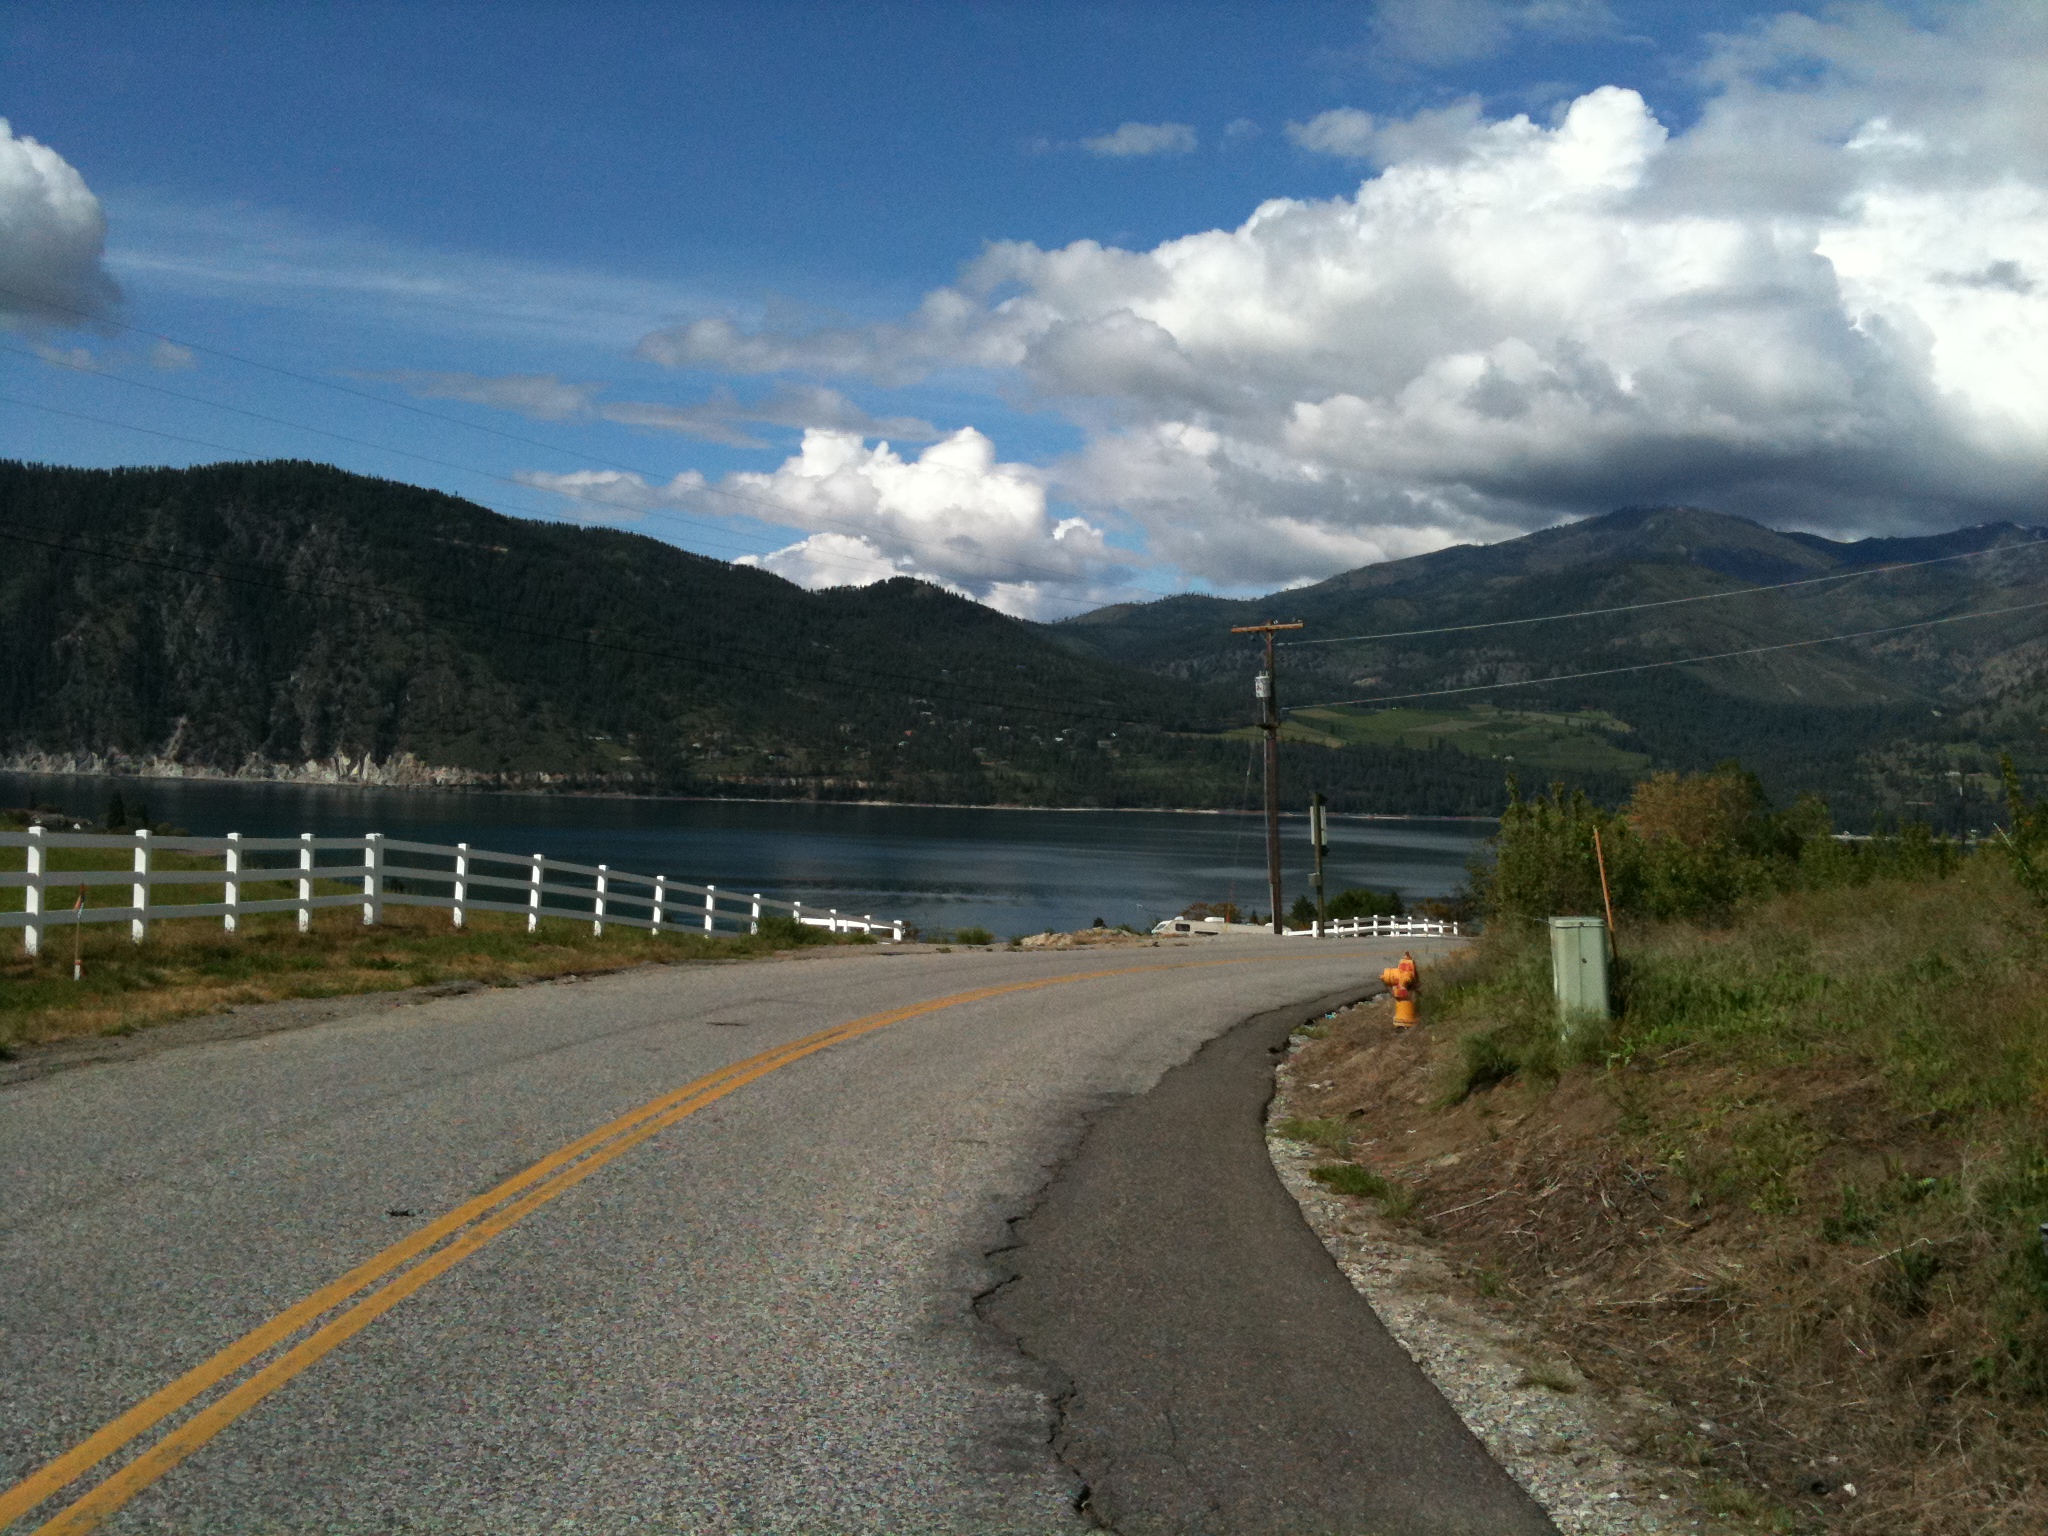 Bringing the Chelan Ironman Training Weekend to an End